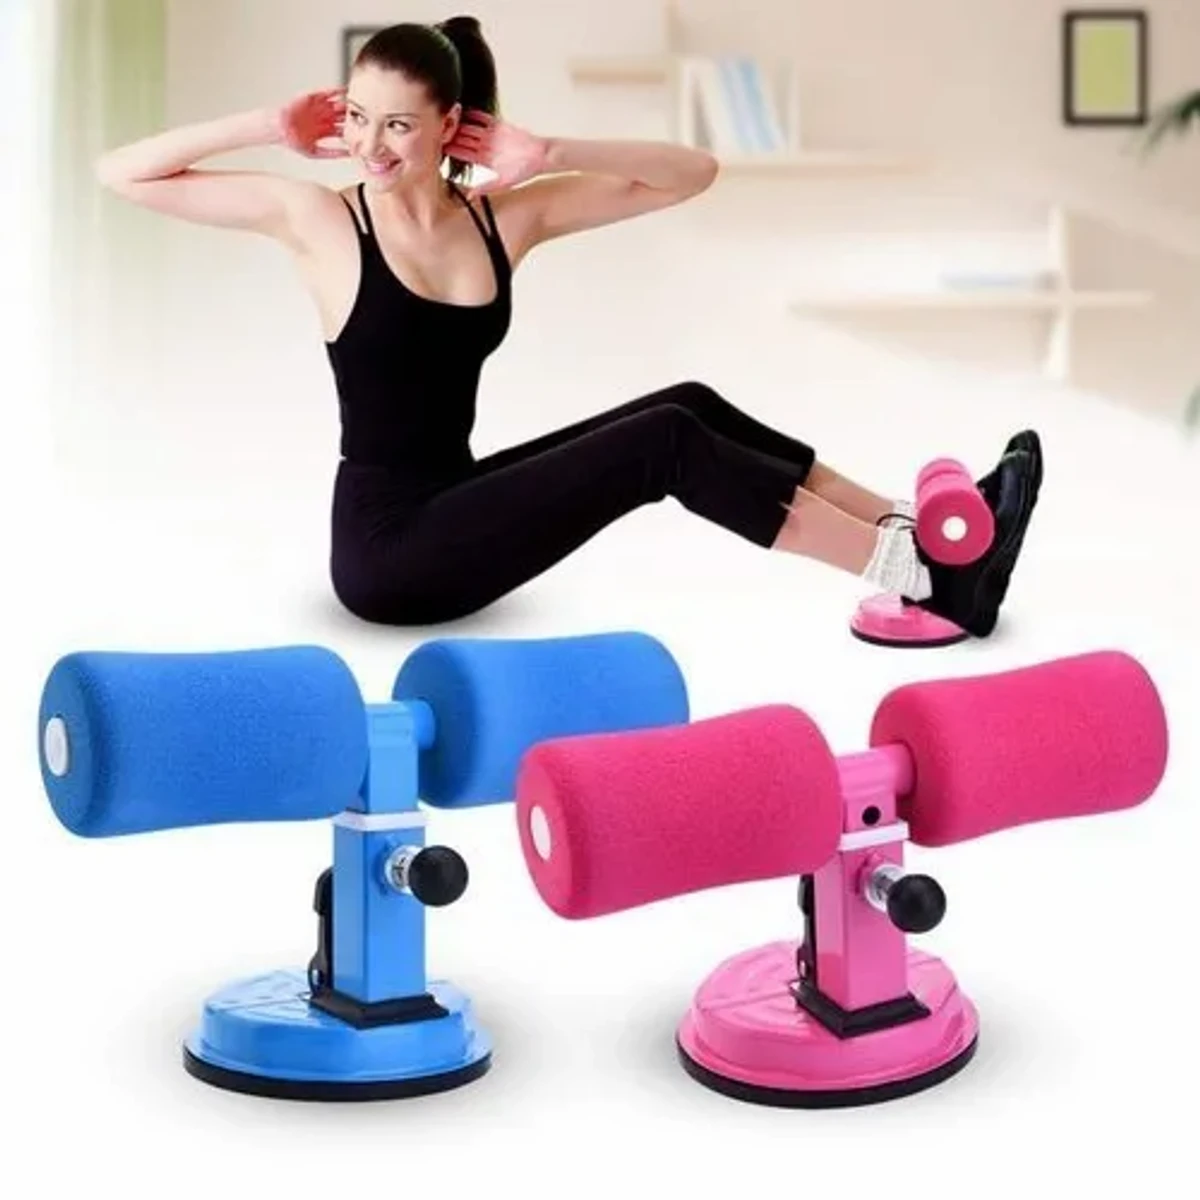 Sit Up Bar for men and women